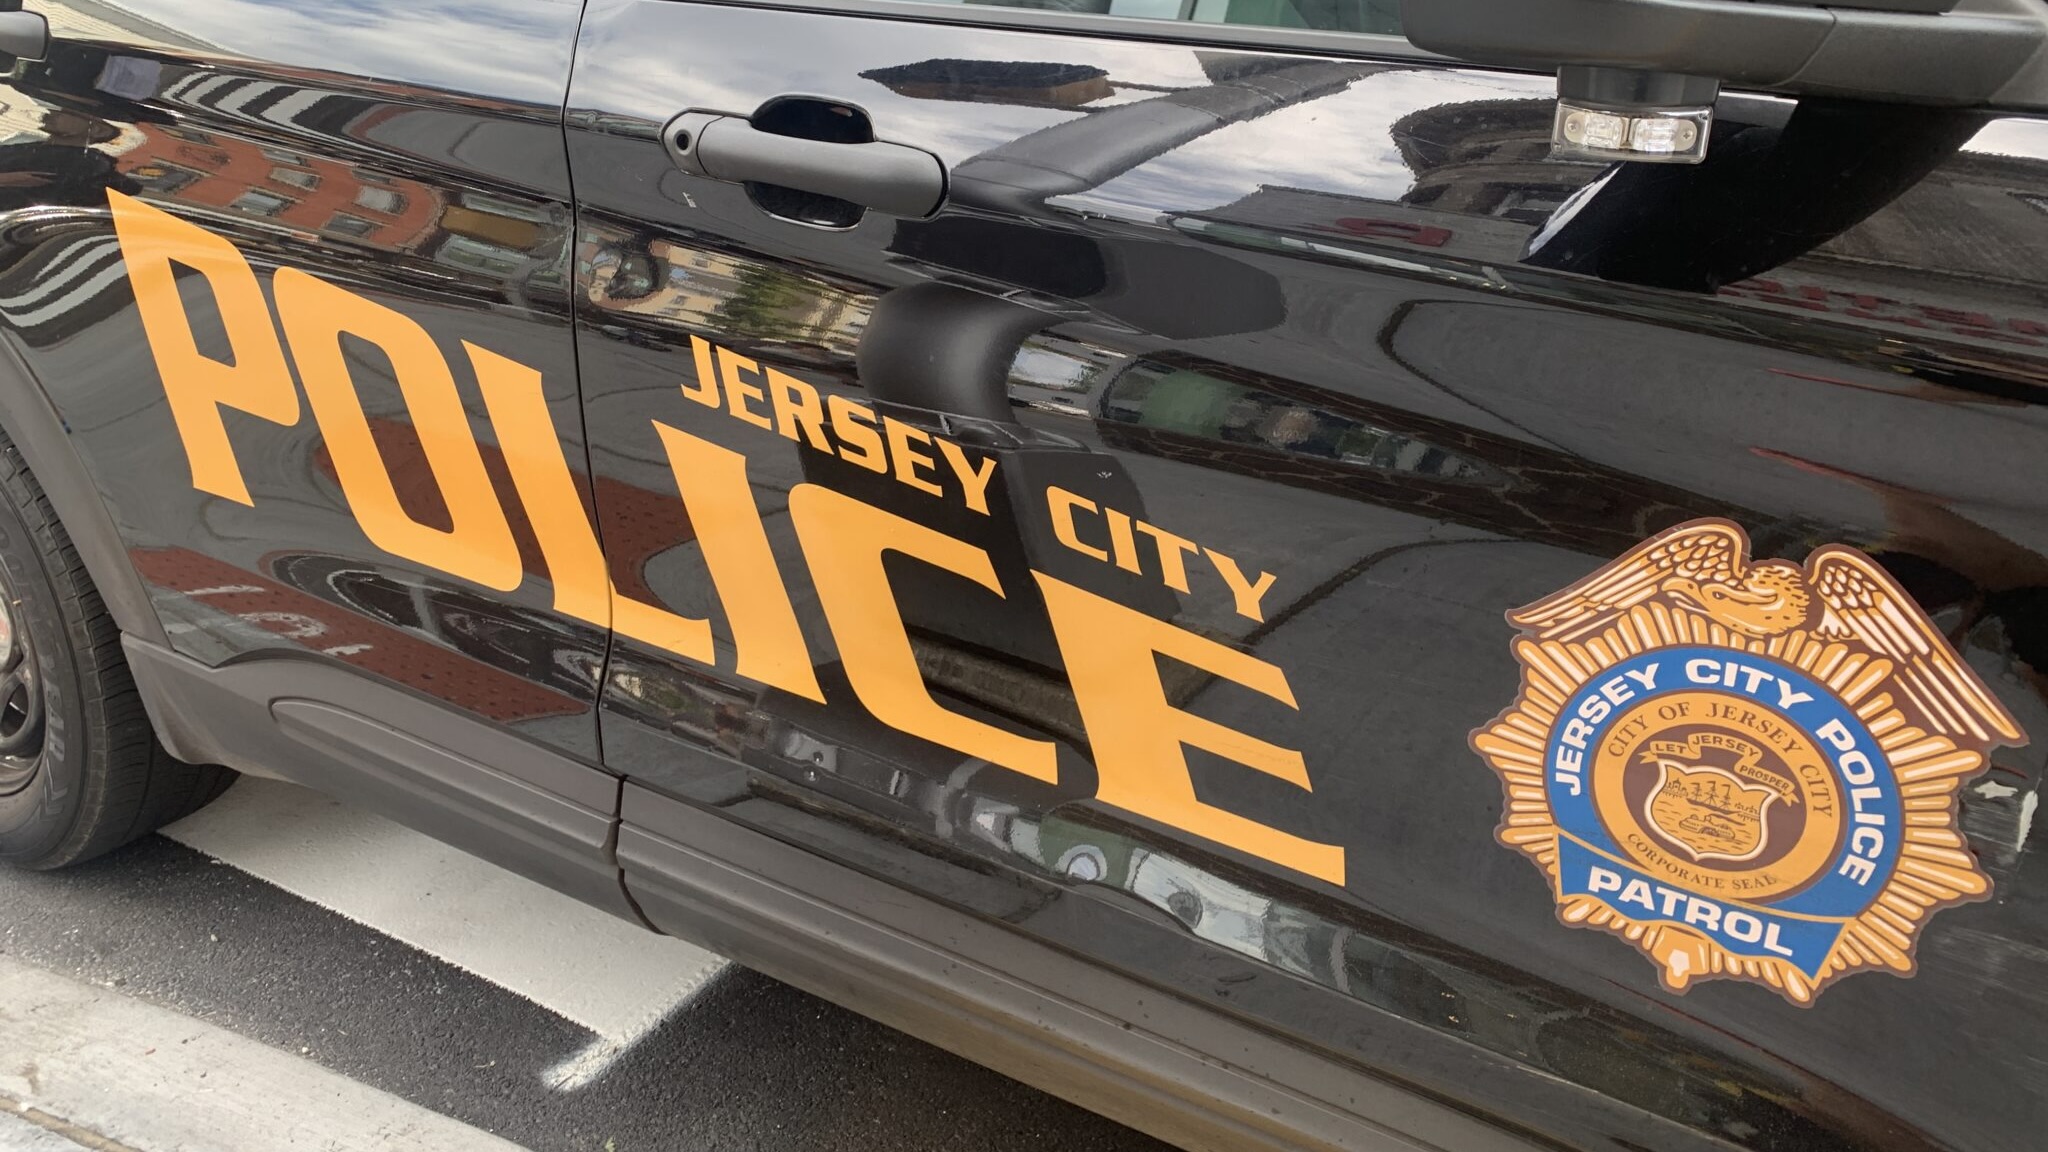 Brothers Who Raced Cars on JFK Blvd. Charged in 2021 Crash